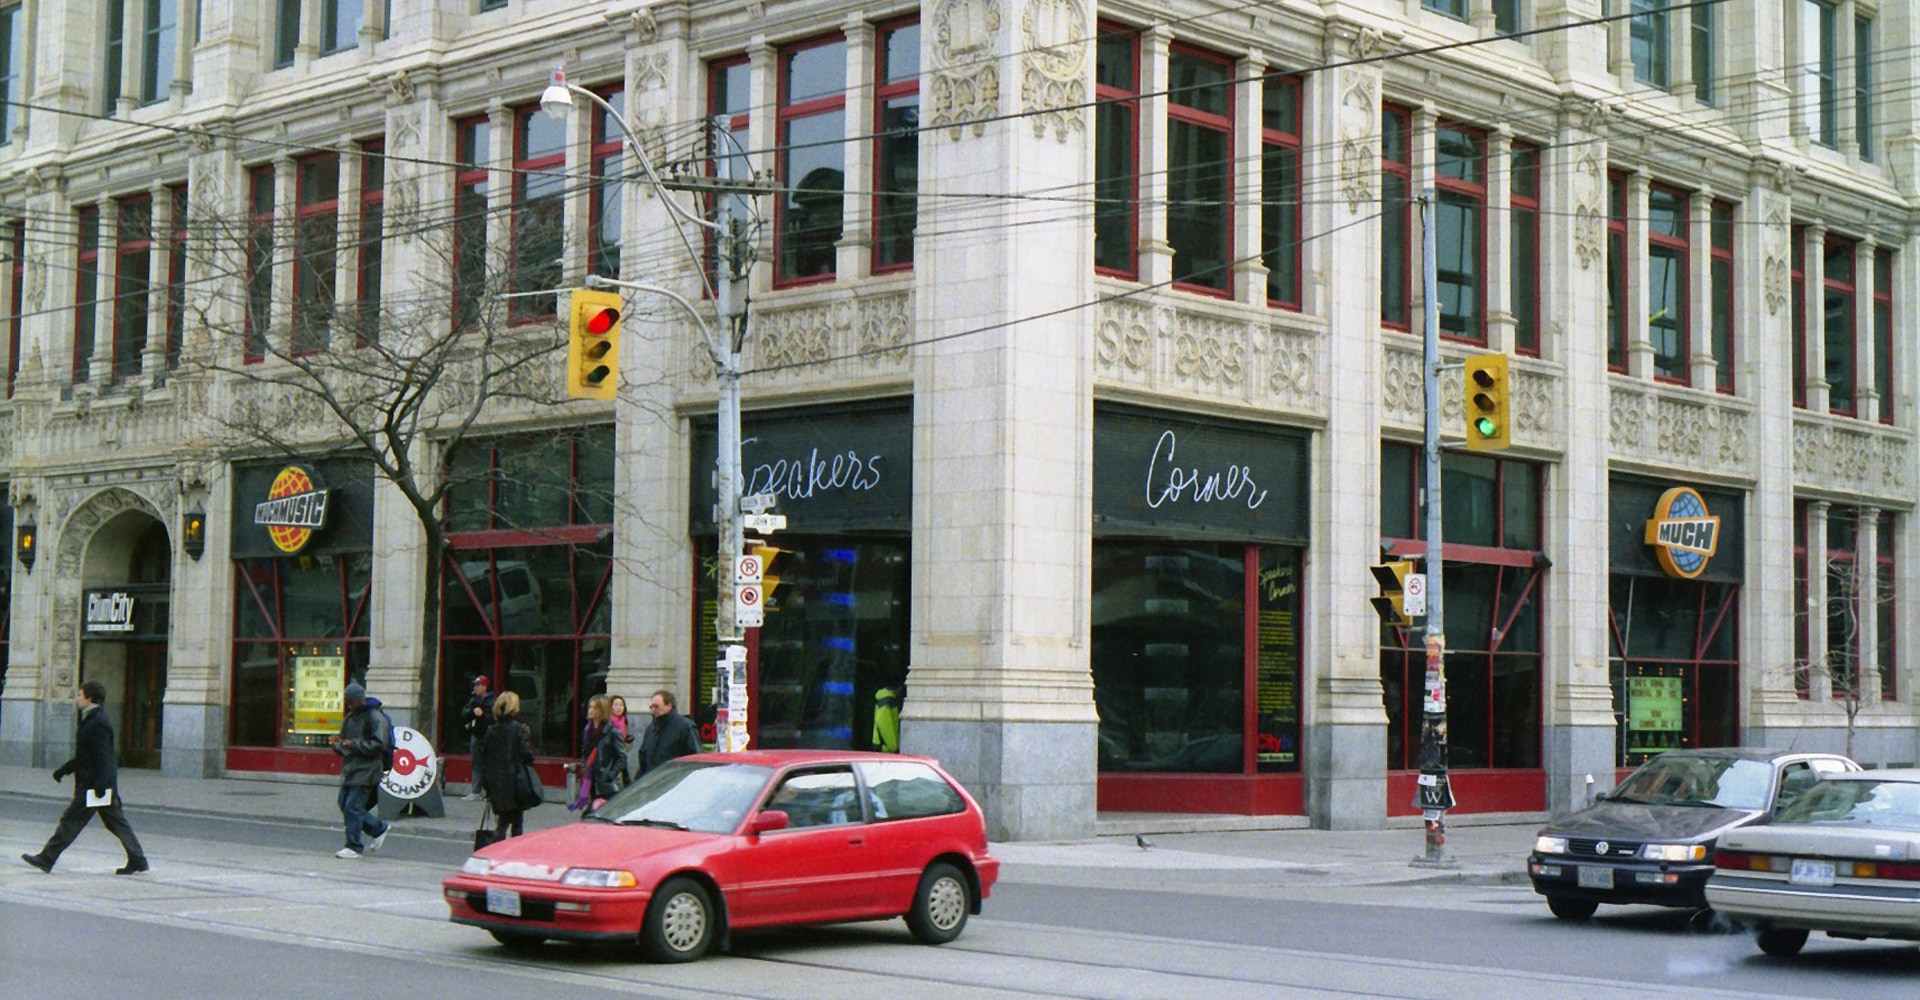 Exterior of a midrise building on the corner of an urban intersection. A car is driving through the intersection. Signs that read "Much" and "Speaker's Corner" are on the facade.